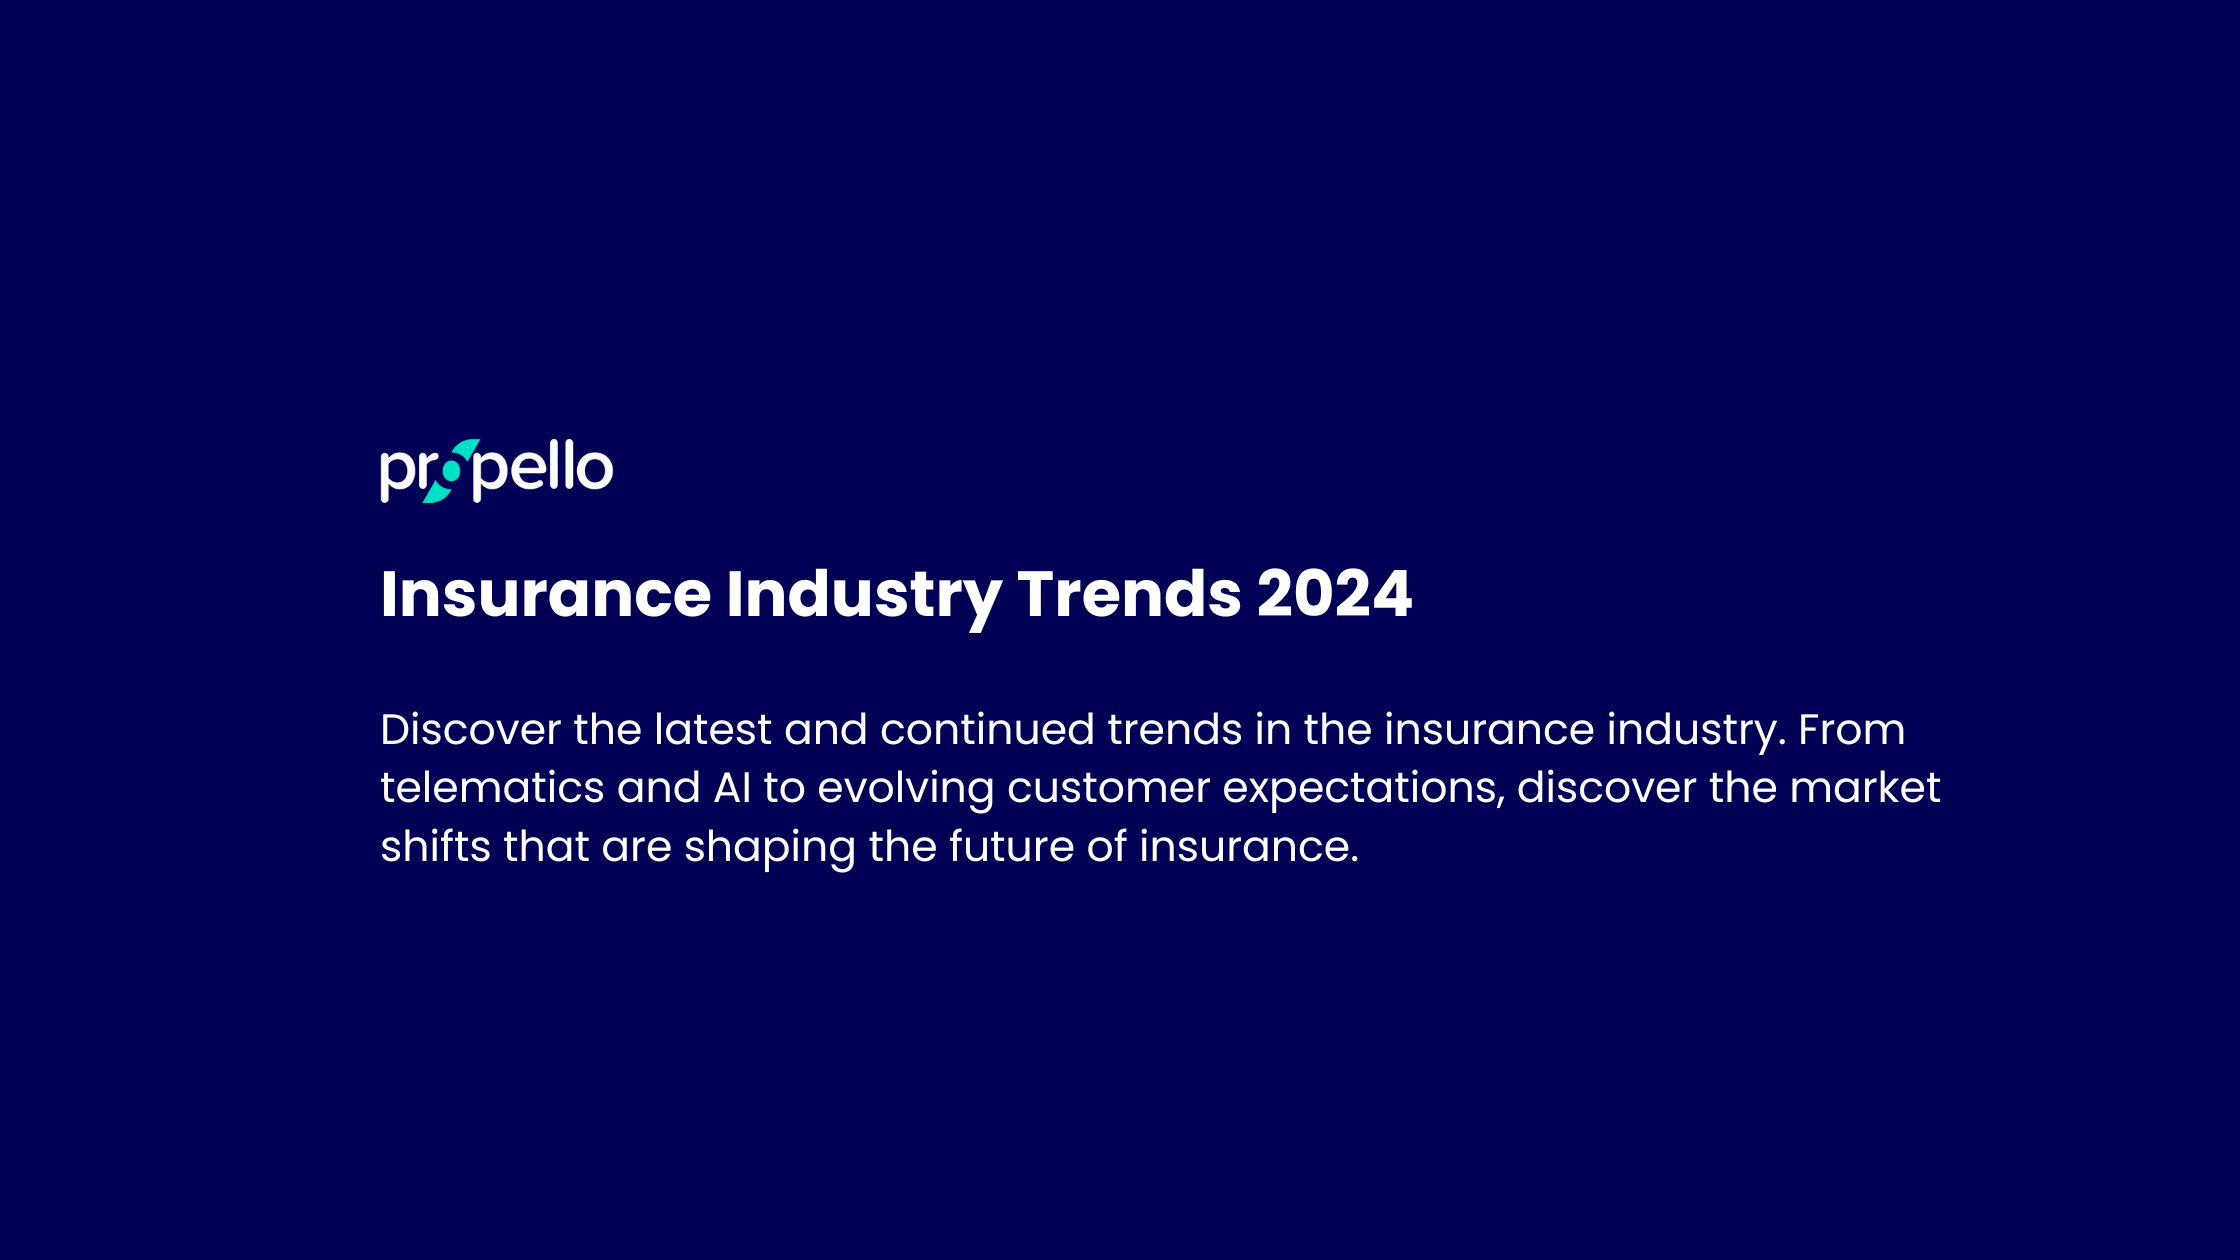 Insurance industry trends